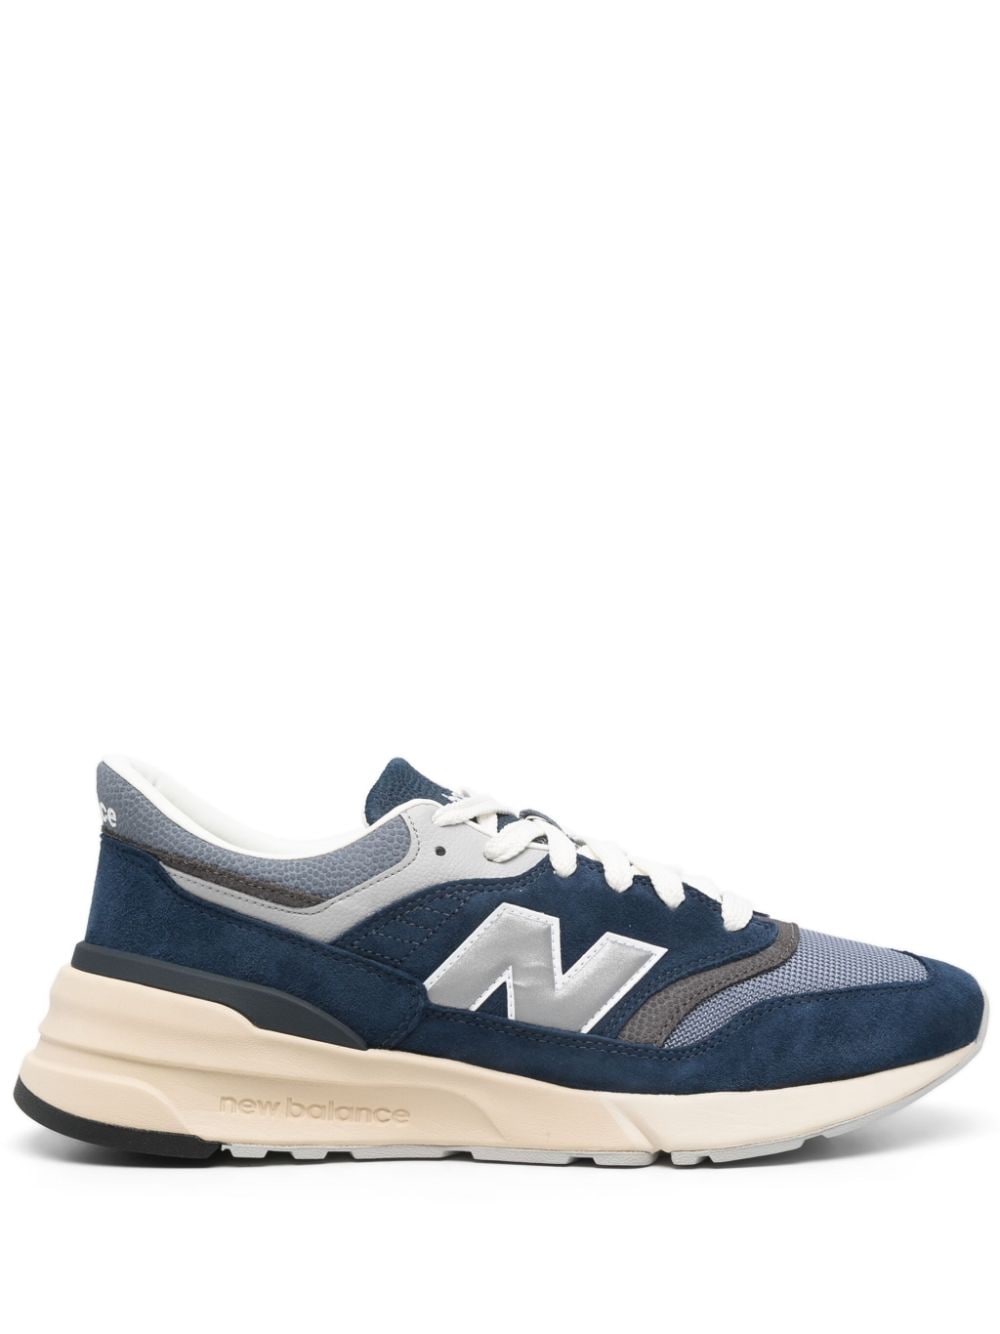 New Balance 997R suede sneakers - Blue